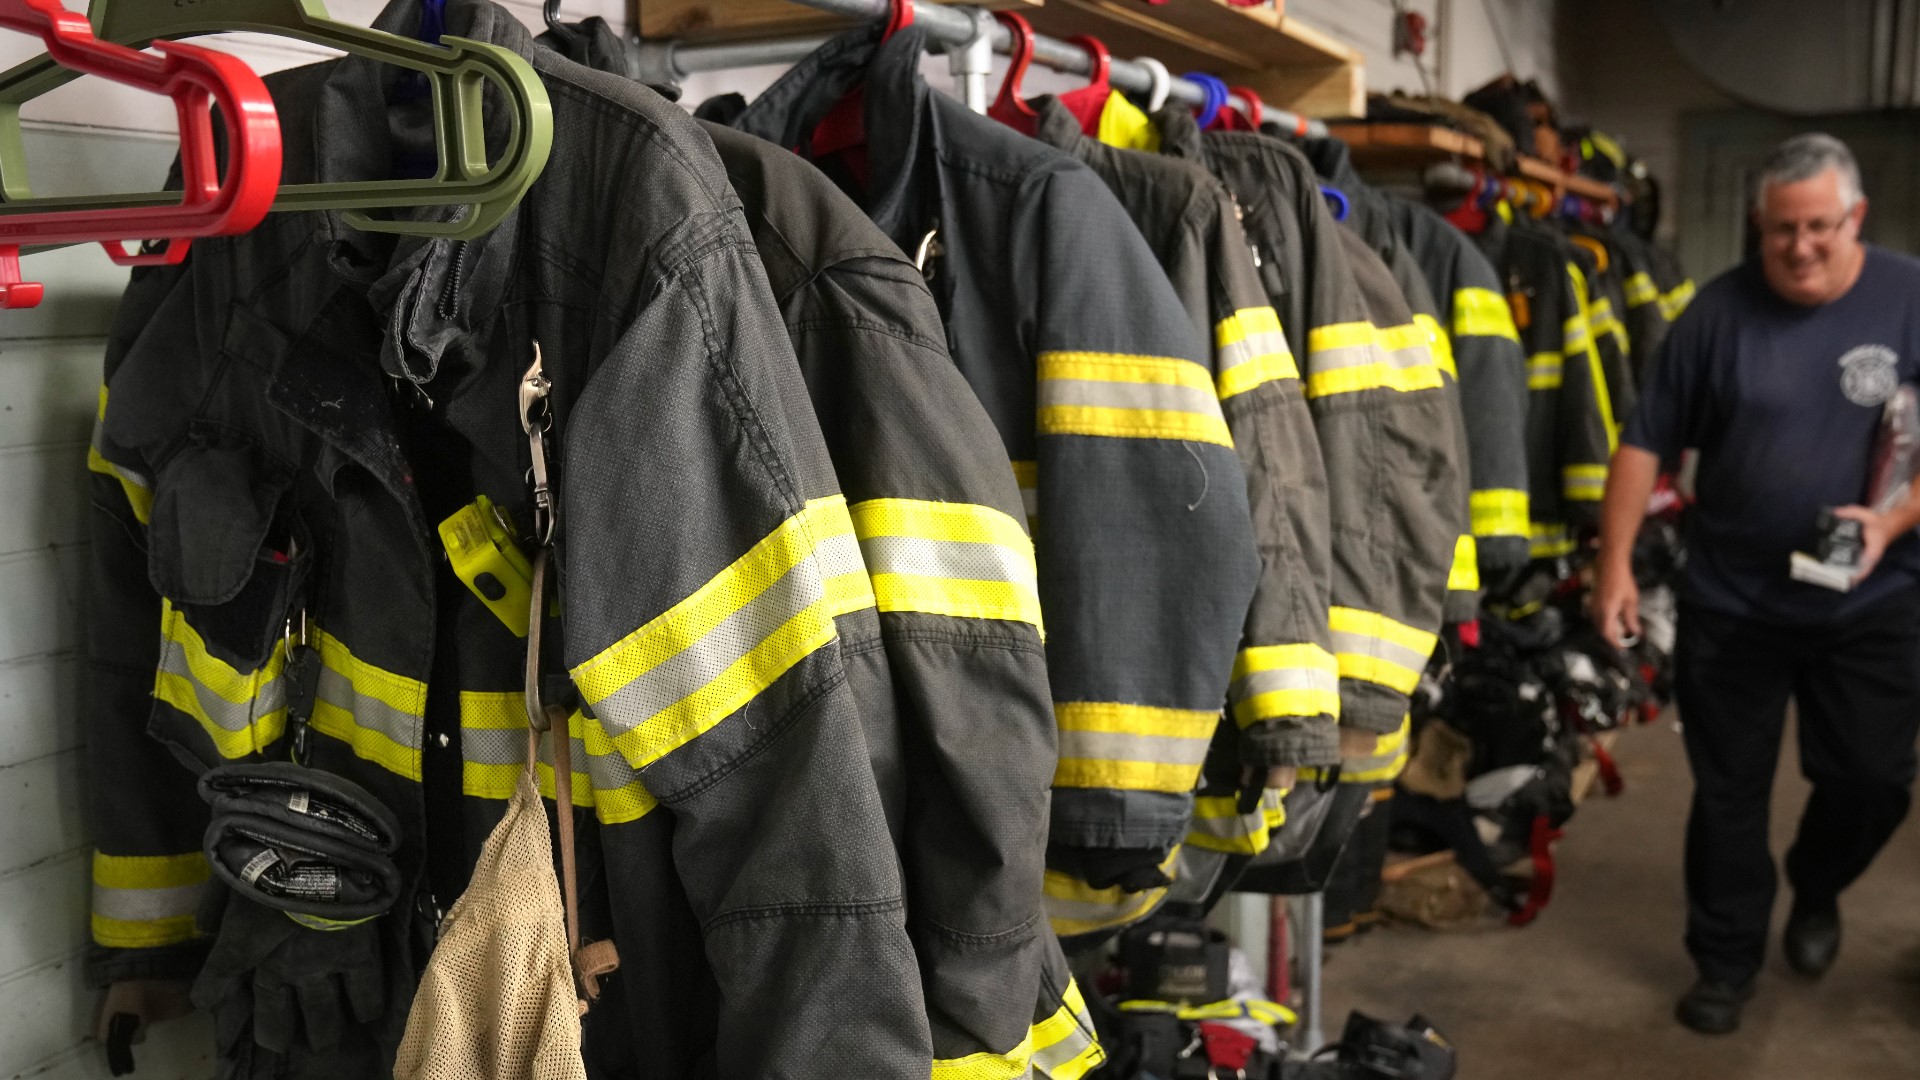 Firefighters are concerned that gear laced with the toxic industrial compound PFAS could be one reason why cancer rates among their ranks are rising.